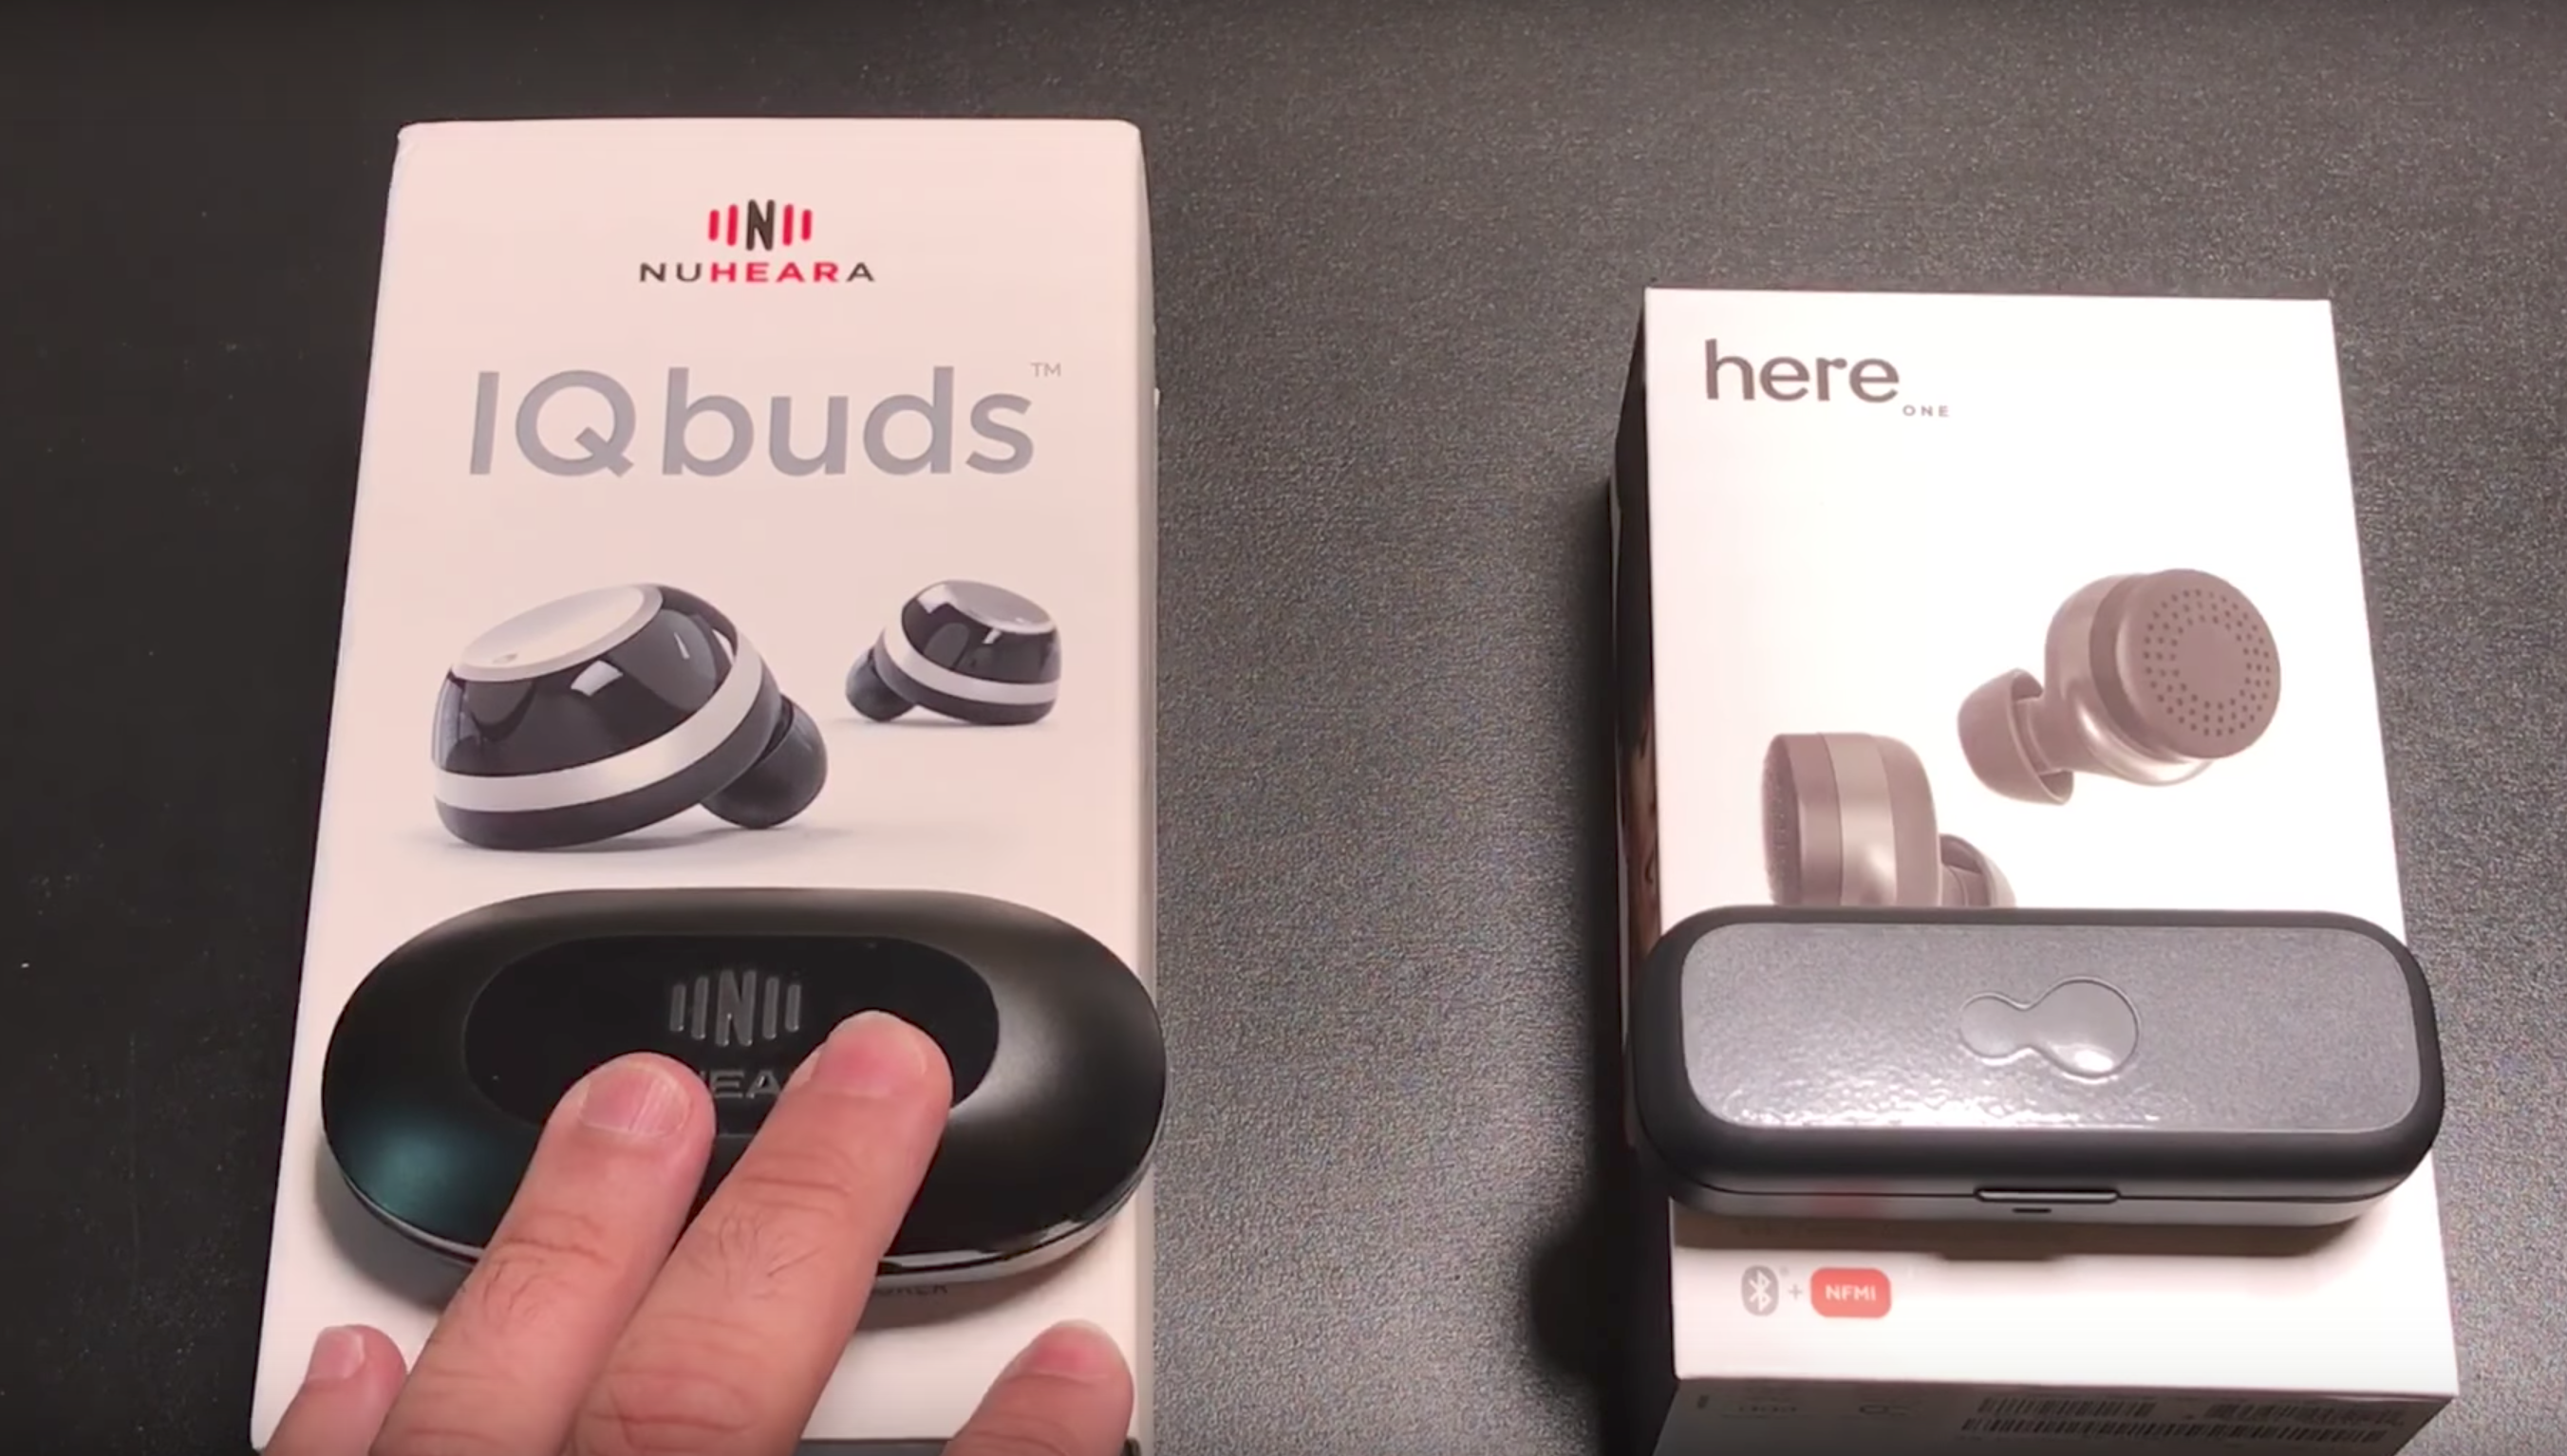 Nuheara’s IQbuds vs. Doppler’s Here One – An Independent Assessment